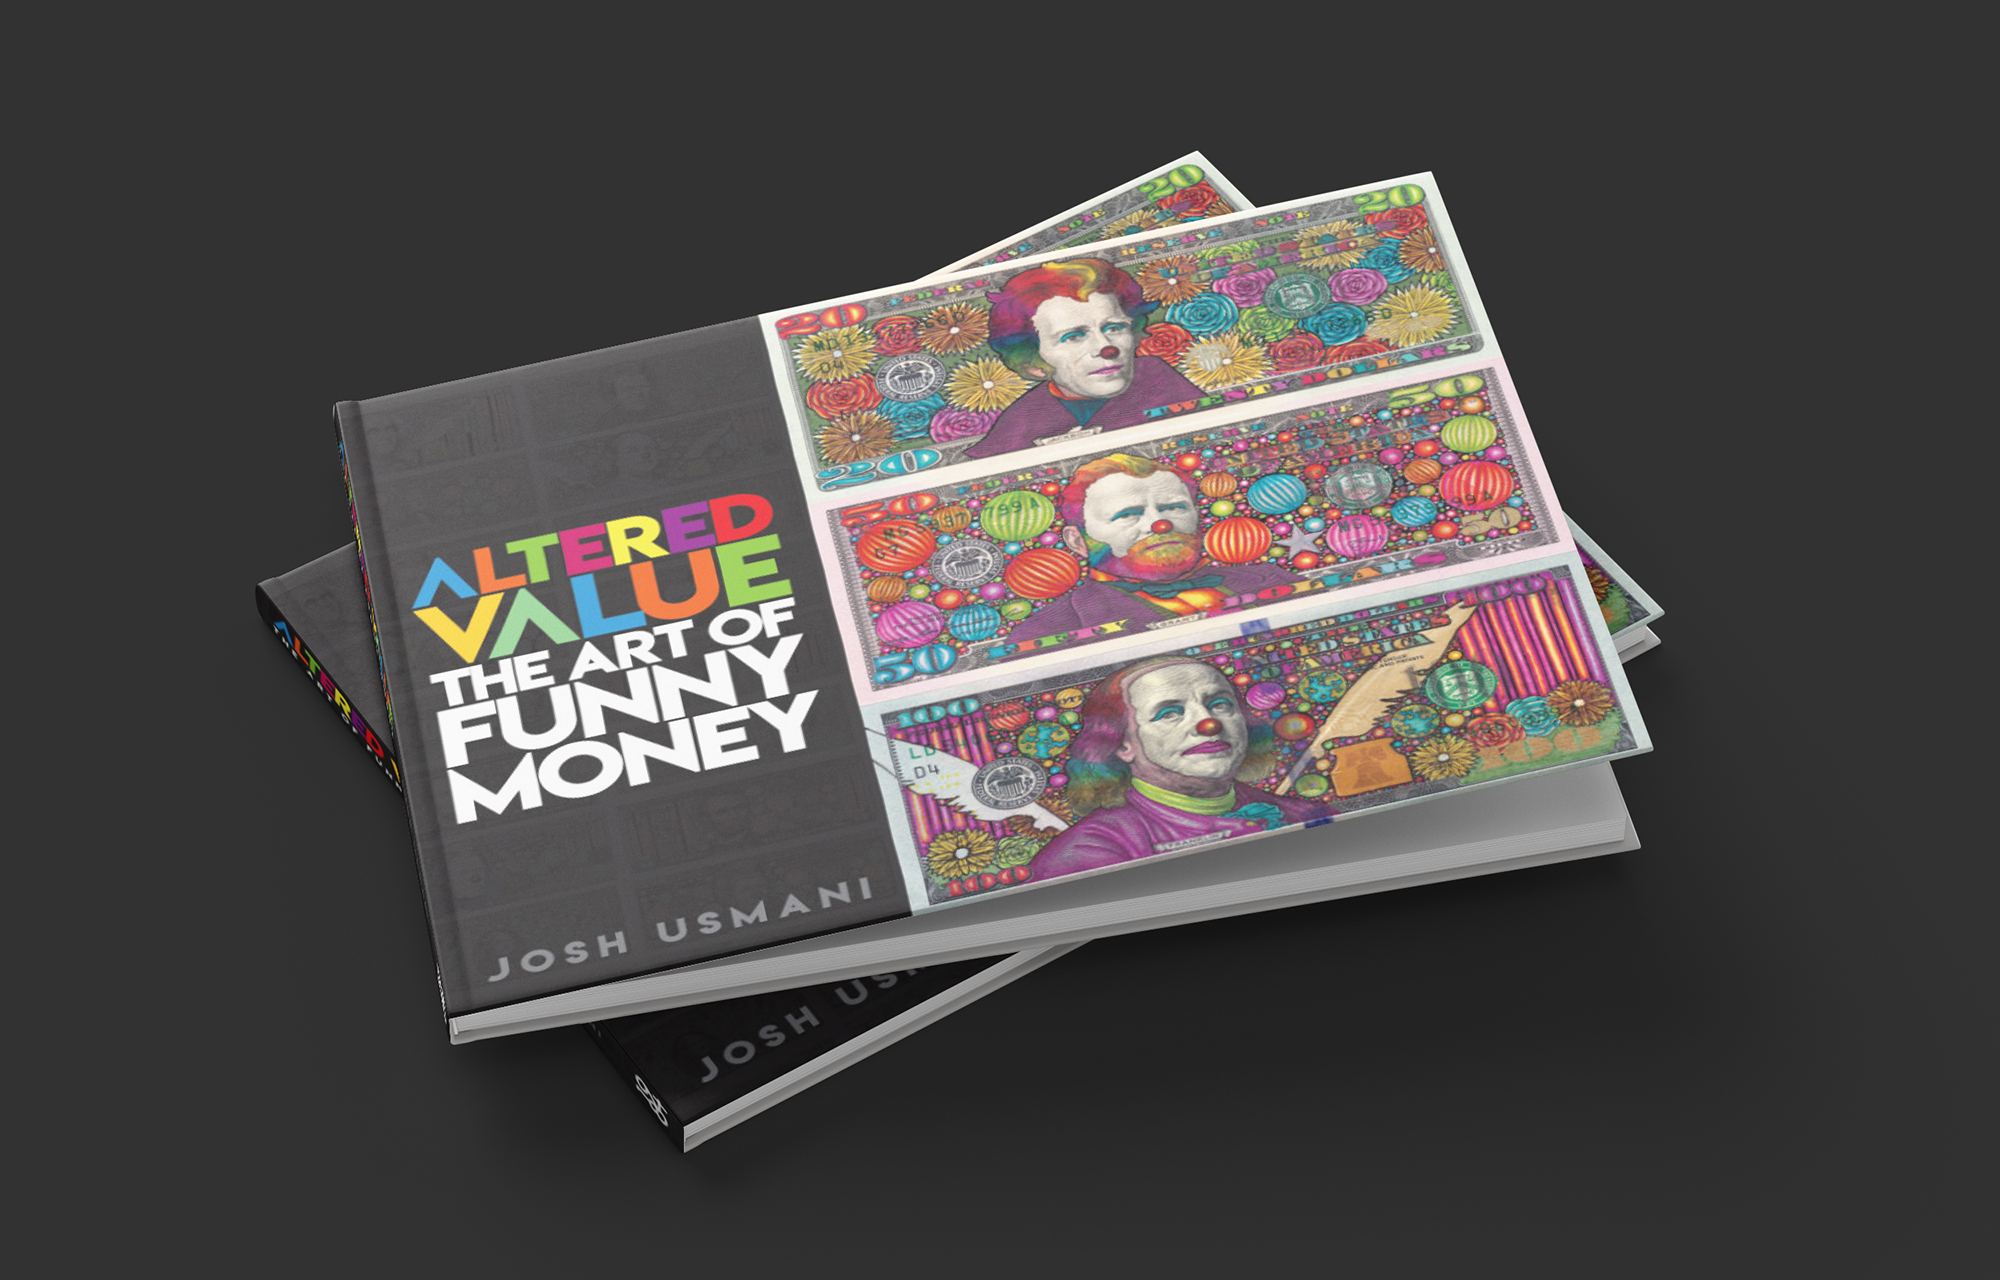 “Altered Value: The Art of Funny Money” by Josh Usmani